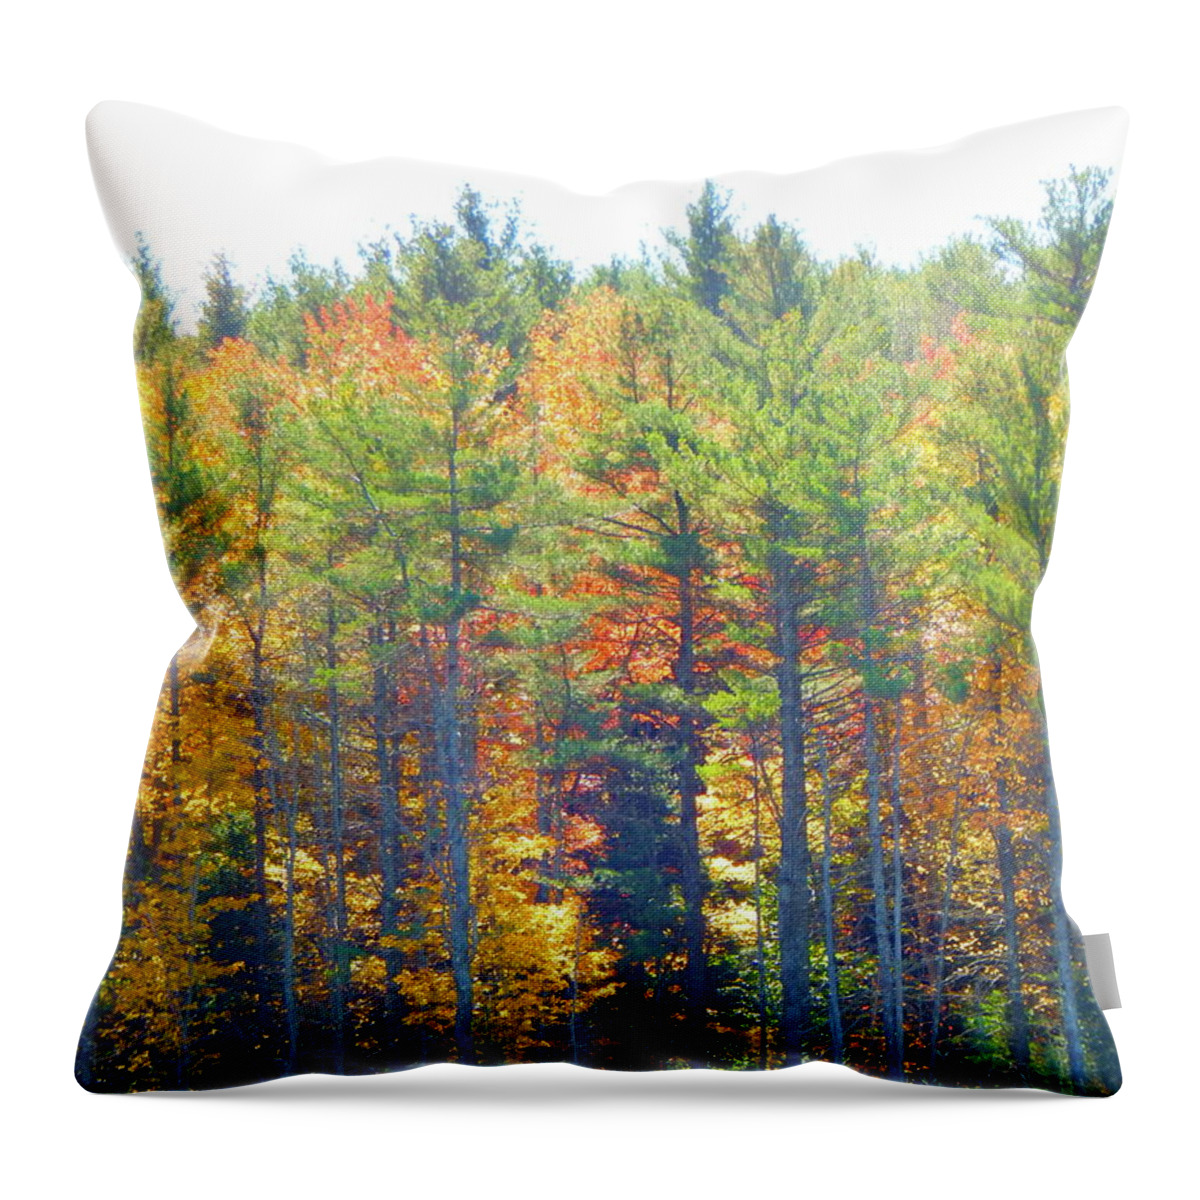 Landscape Throw Pillow featuring the photograph Fall 2016 106 by George Ramos